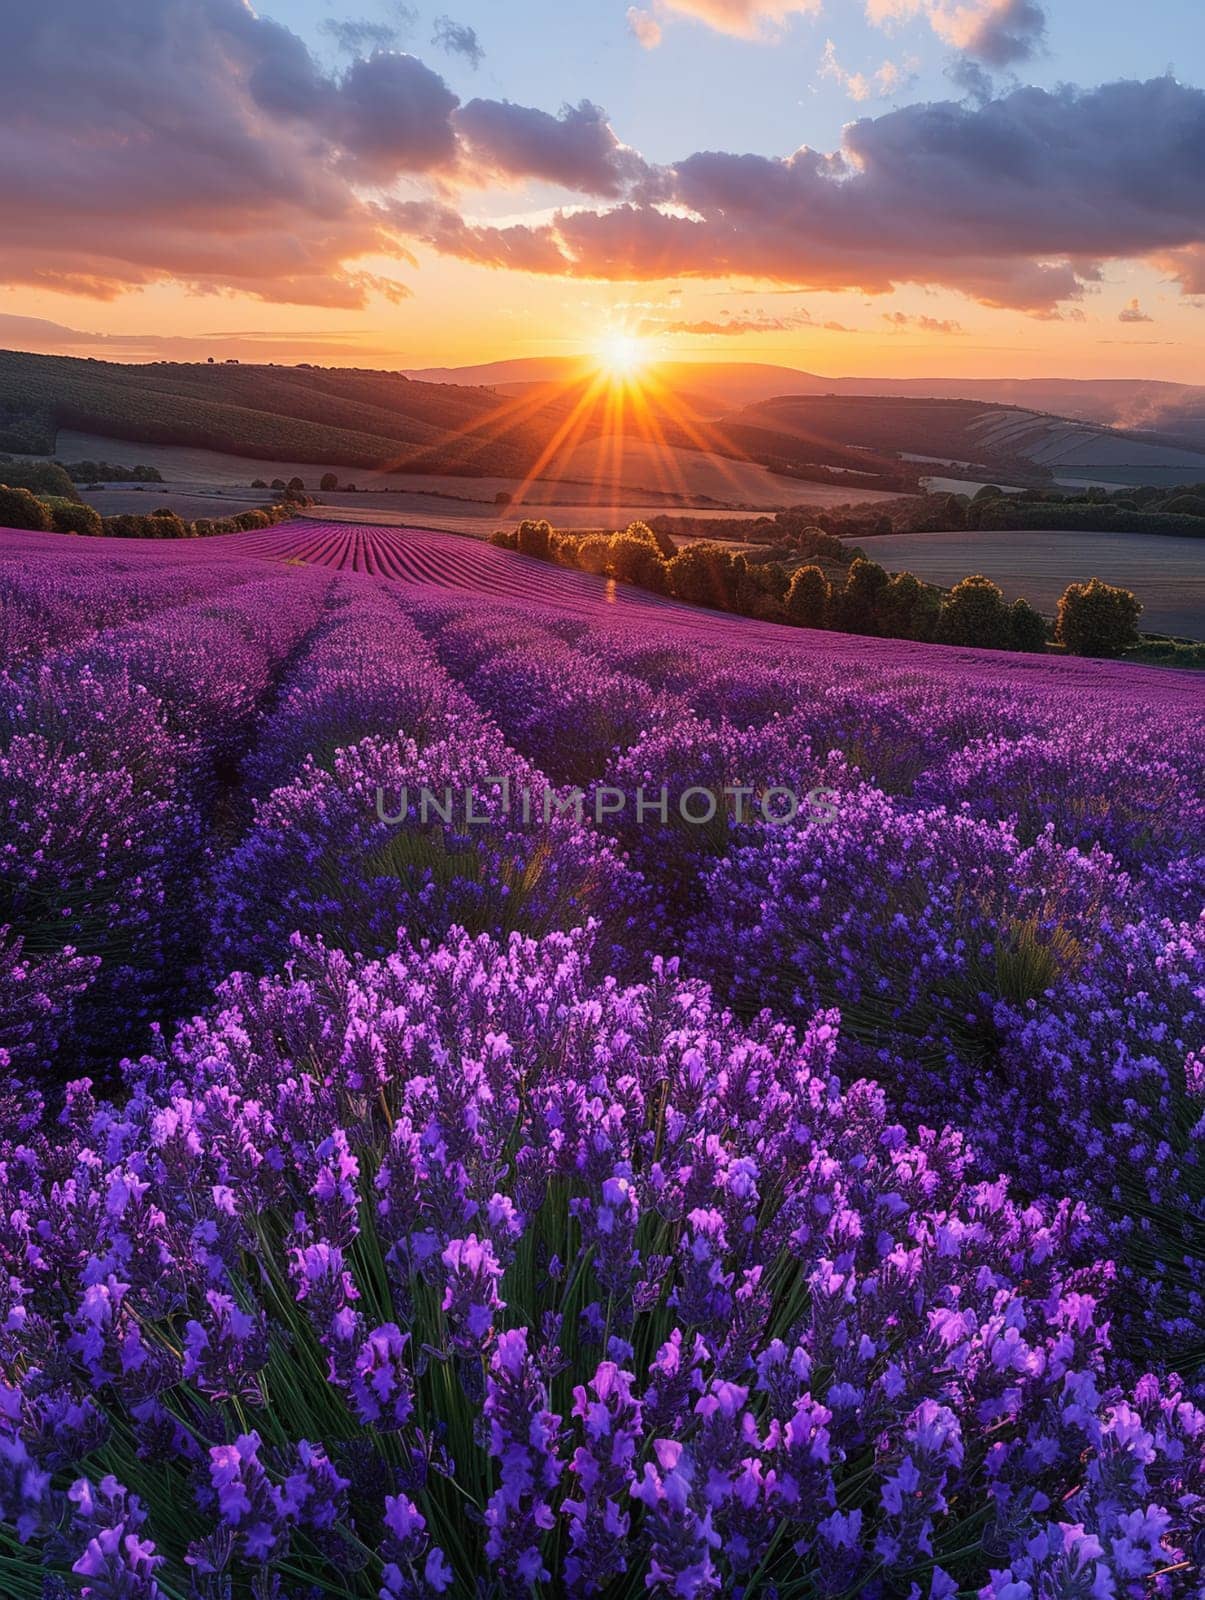 Lavender Fields Swirling in the Breeze at Sunset, The purple blurs with the horizon, the day closing in a fragrant haze.